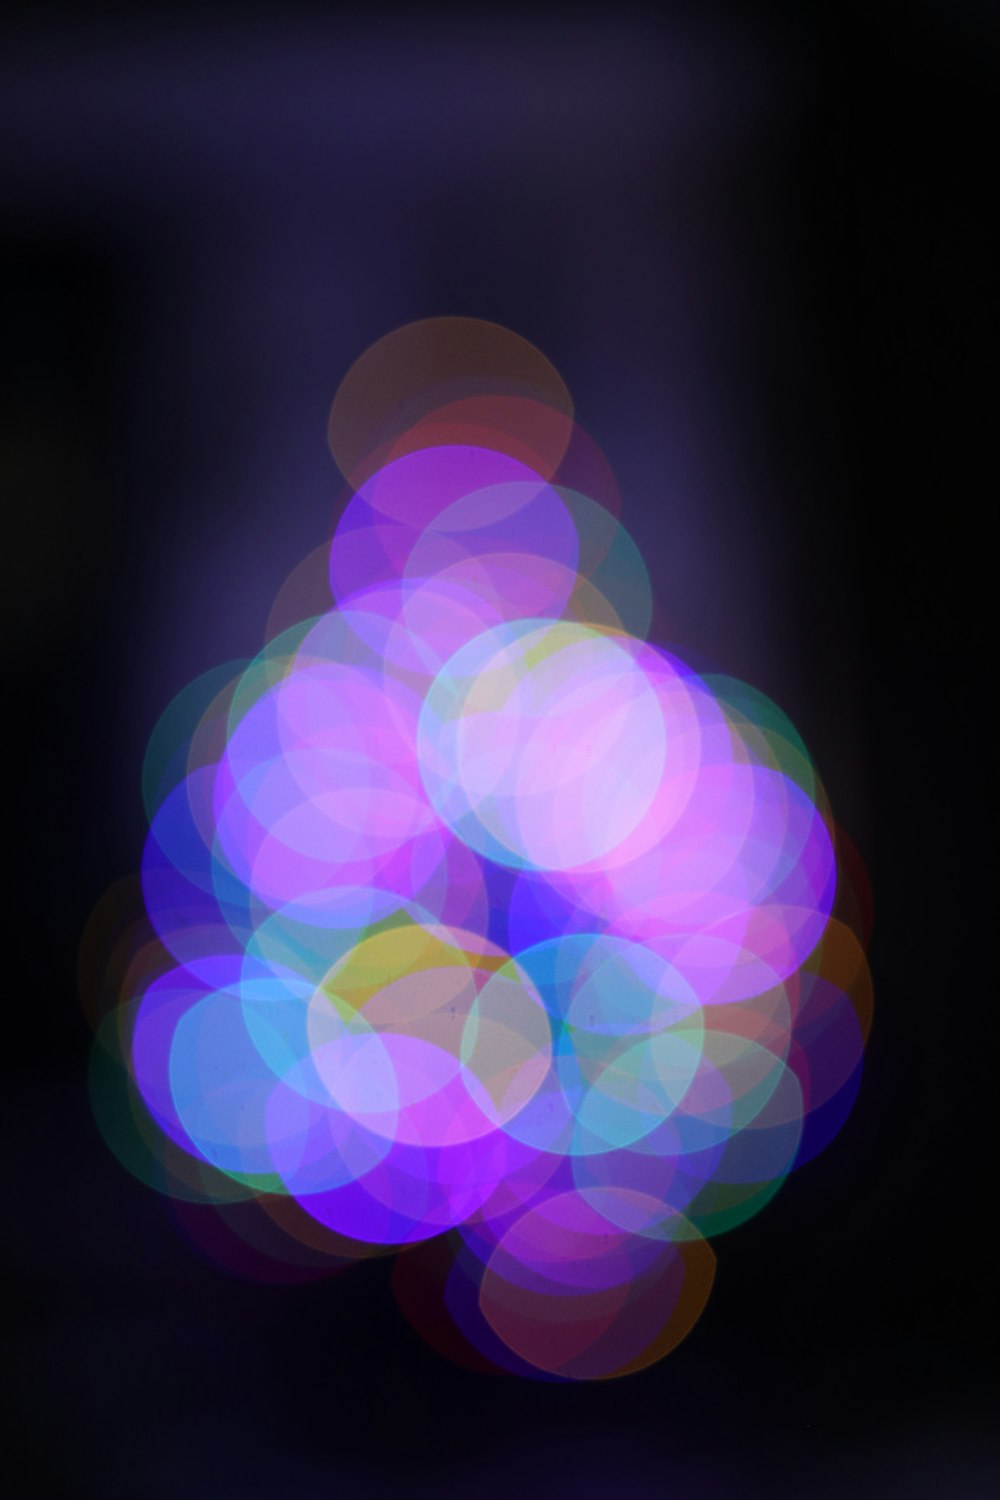 a blurry photo of a blue and purple light